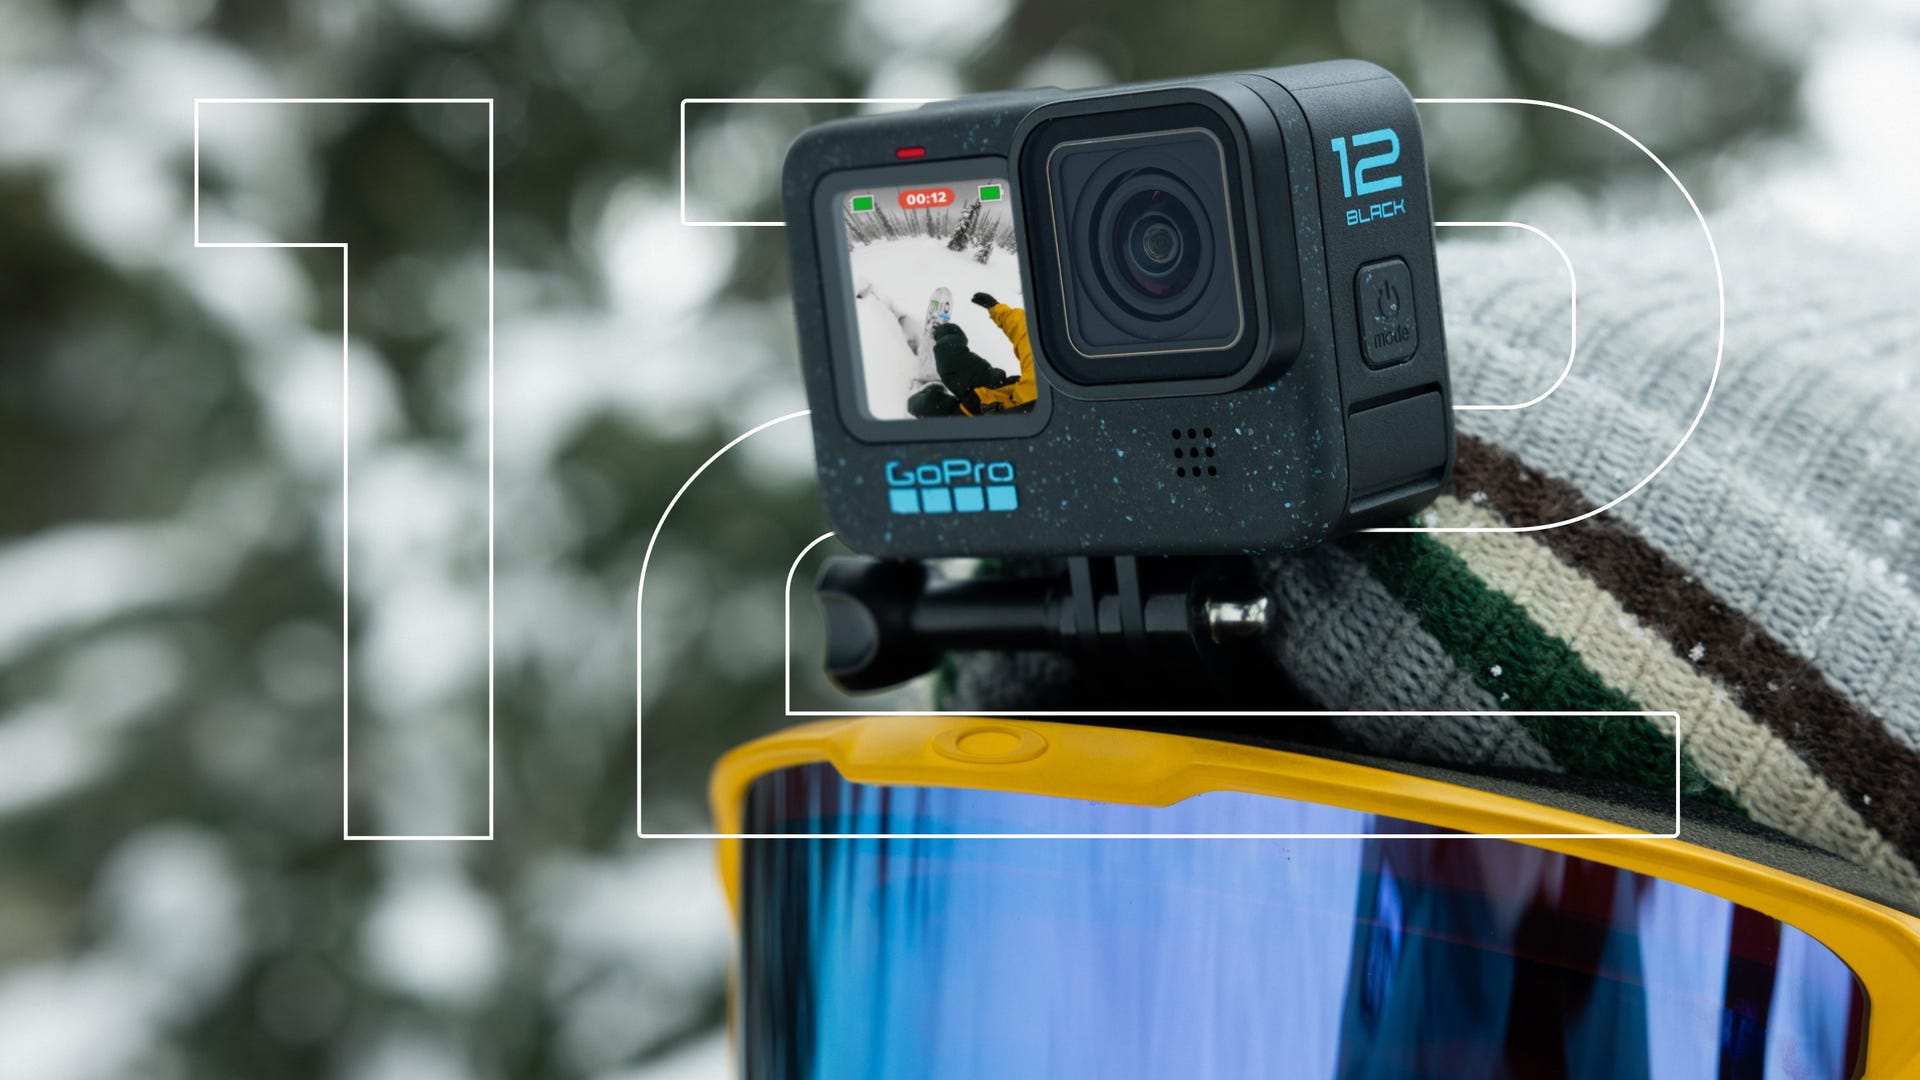 GoPro Hero 12 Black: Extended battery life with new exciting features. Is it time to upgrade?